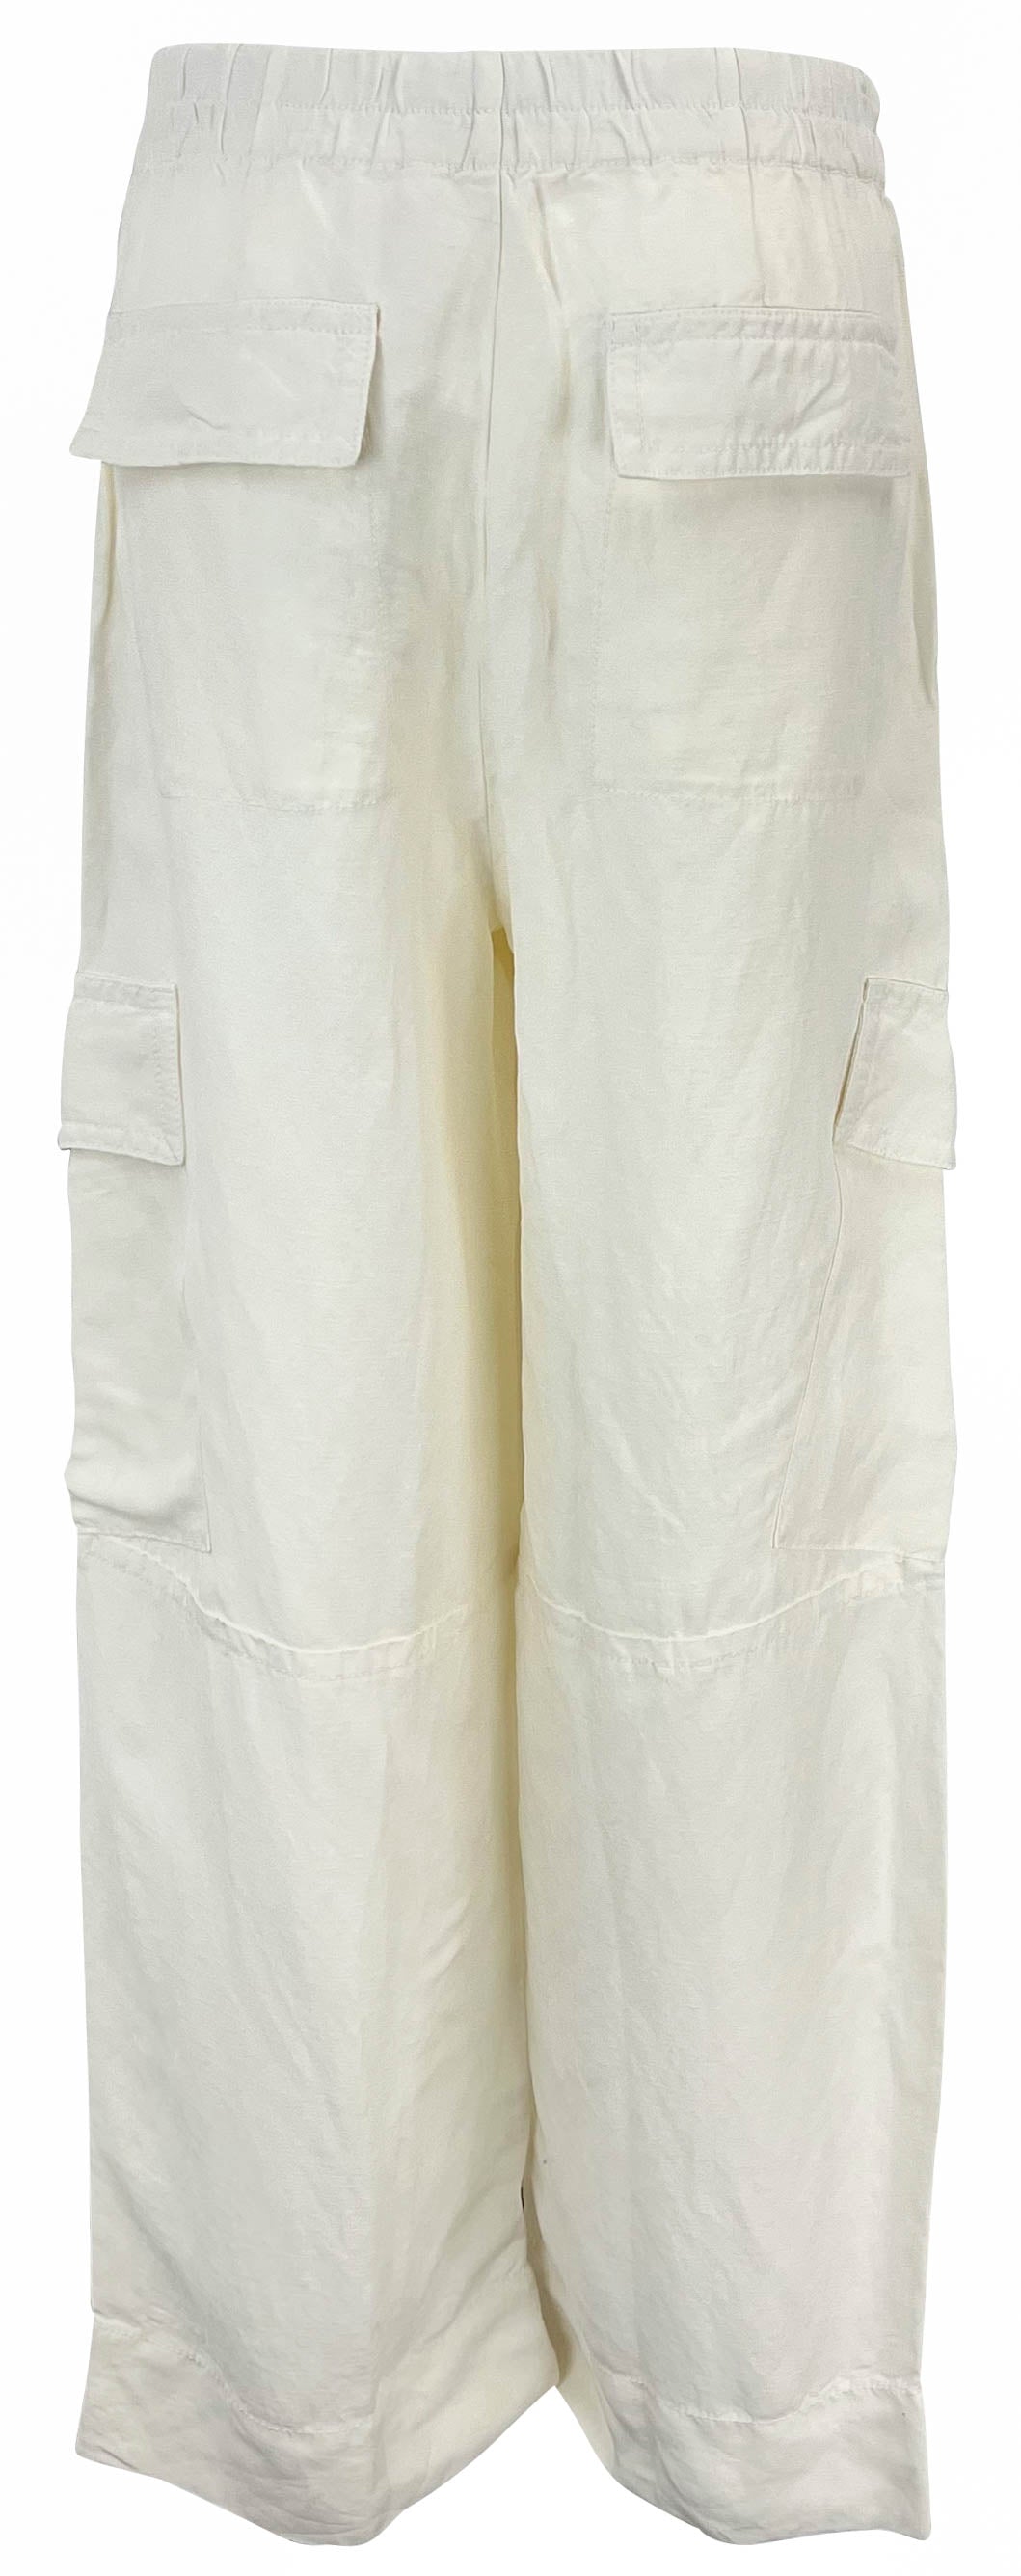 vince. Cargo Pants in Cream - Discounts on Vince. at UAL